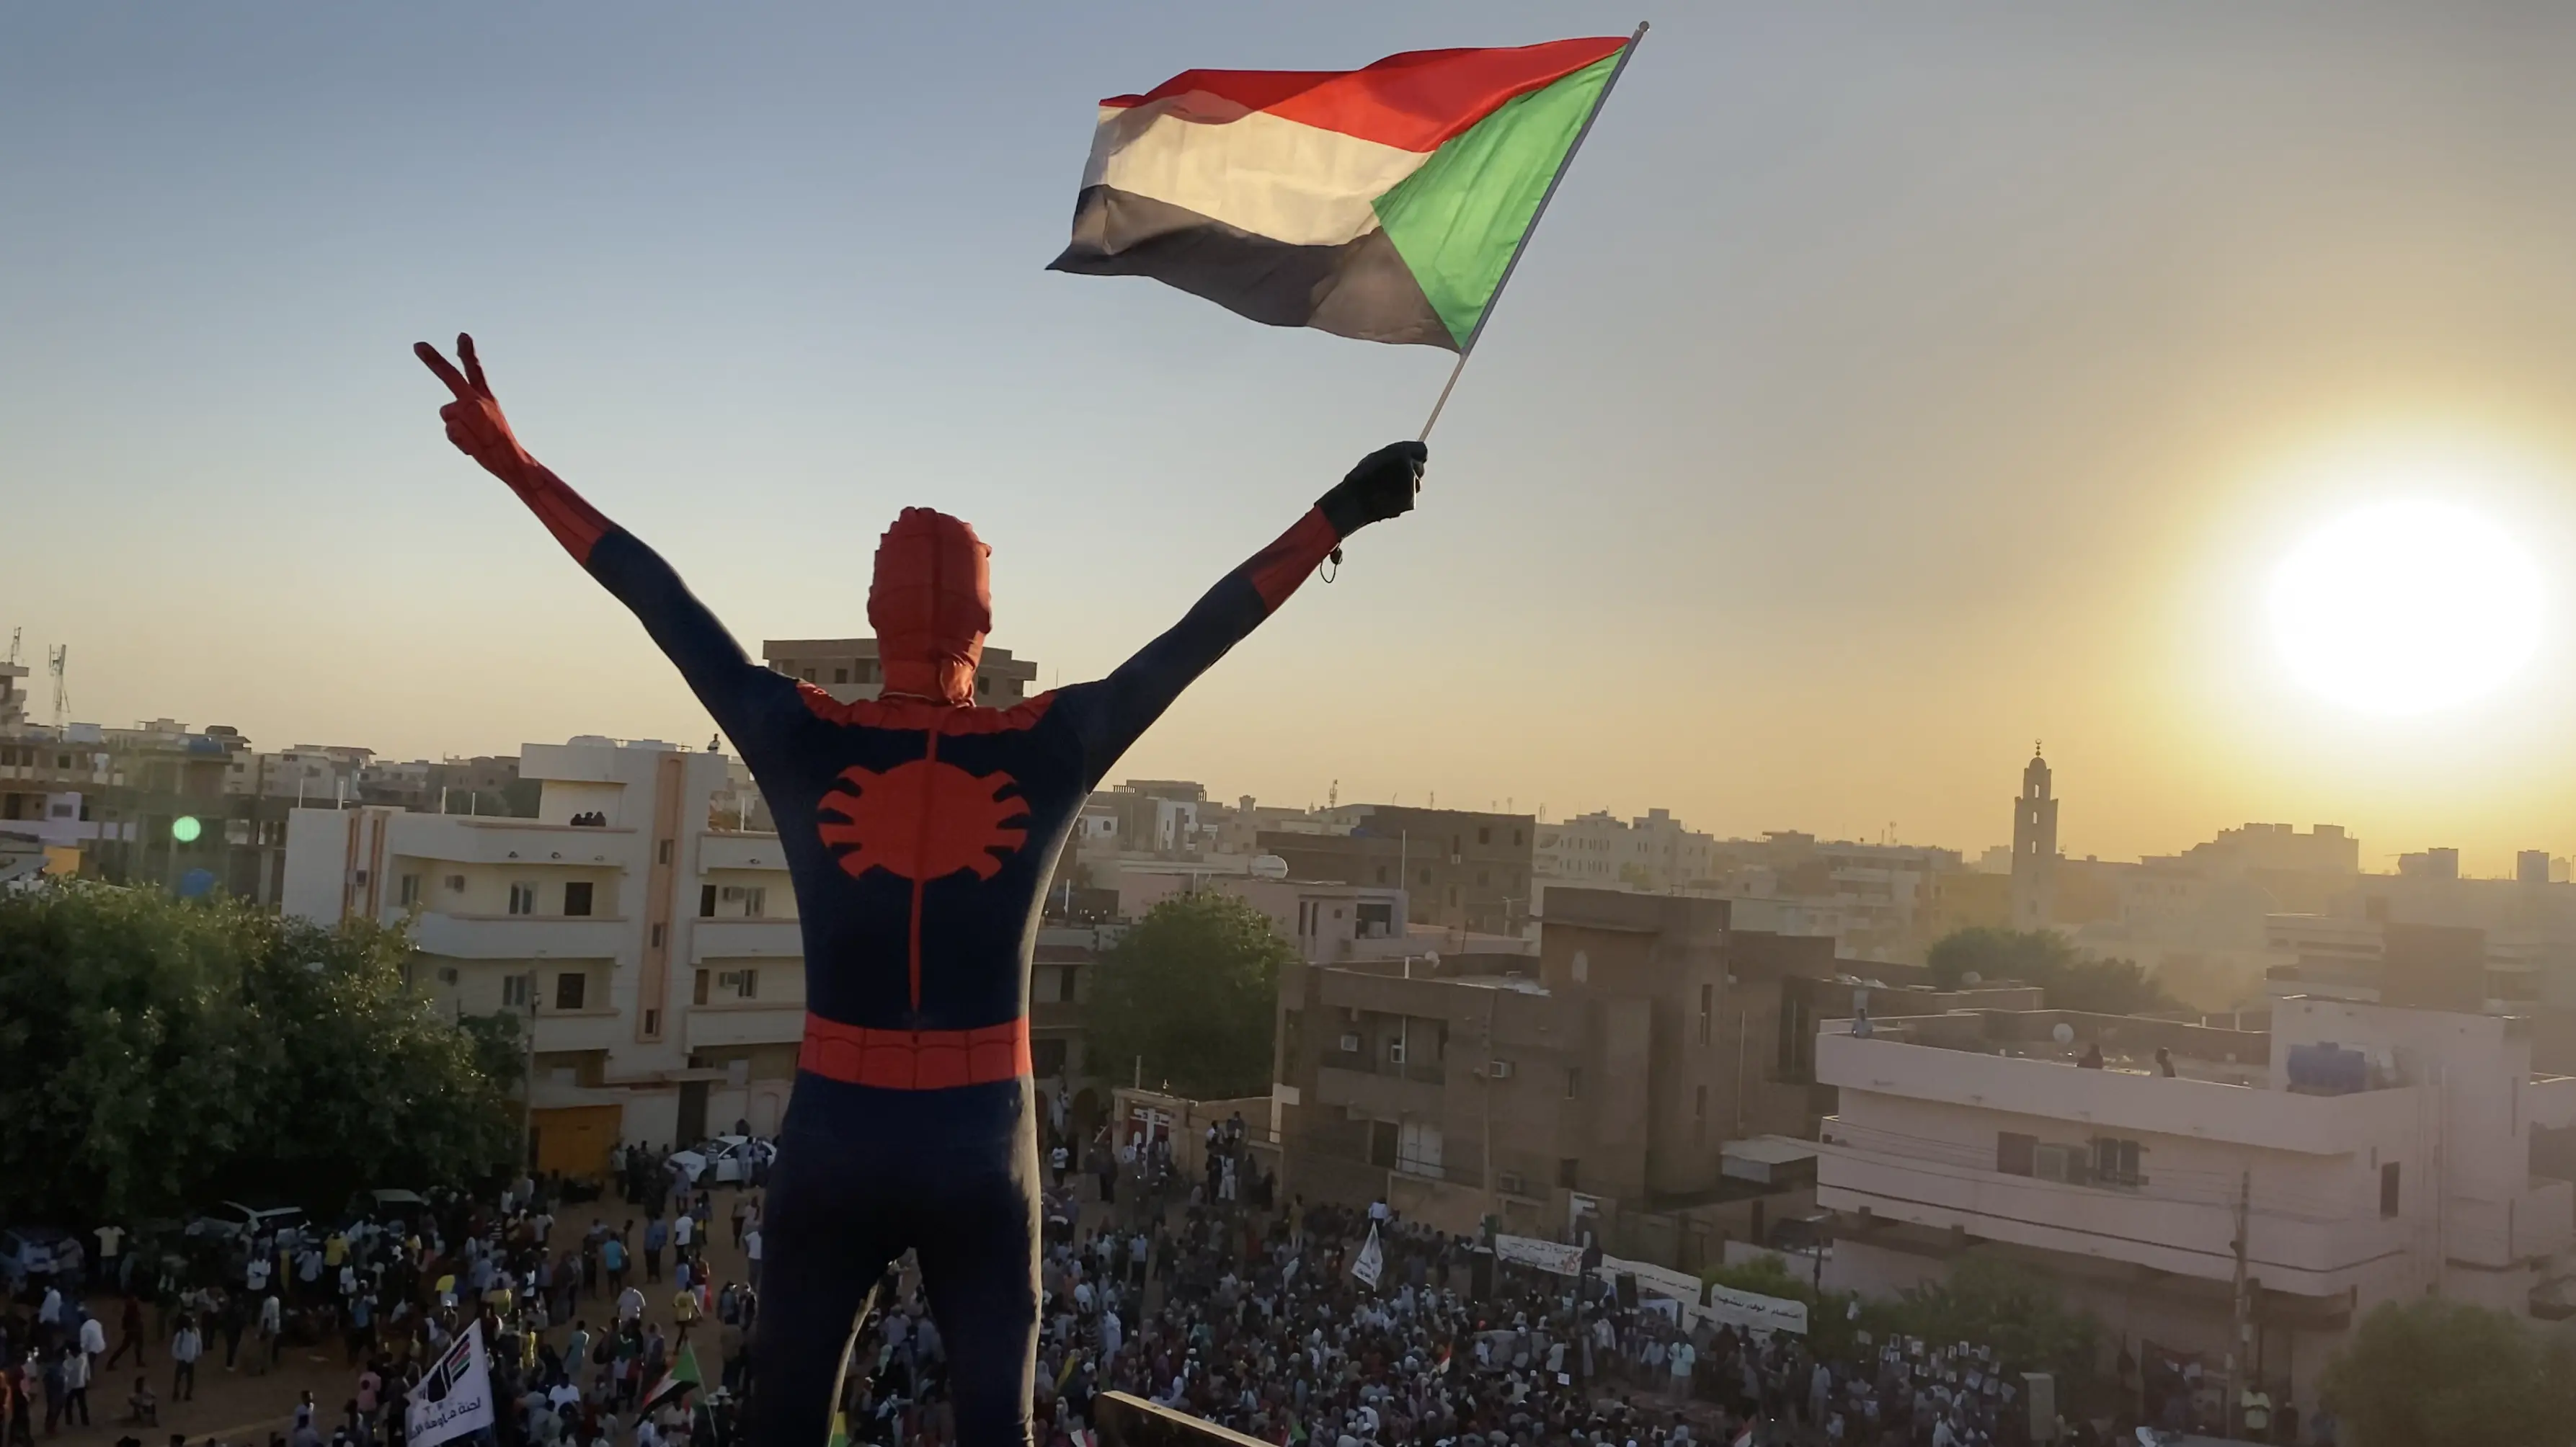 A man in a spider-man outfit stands above a protest in Sudan